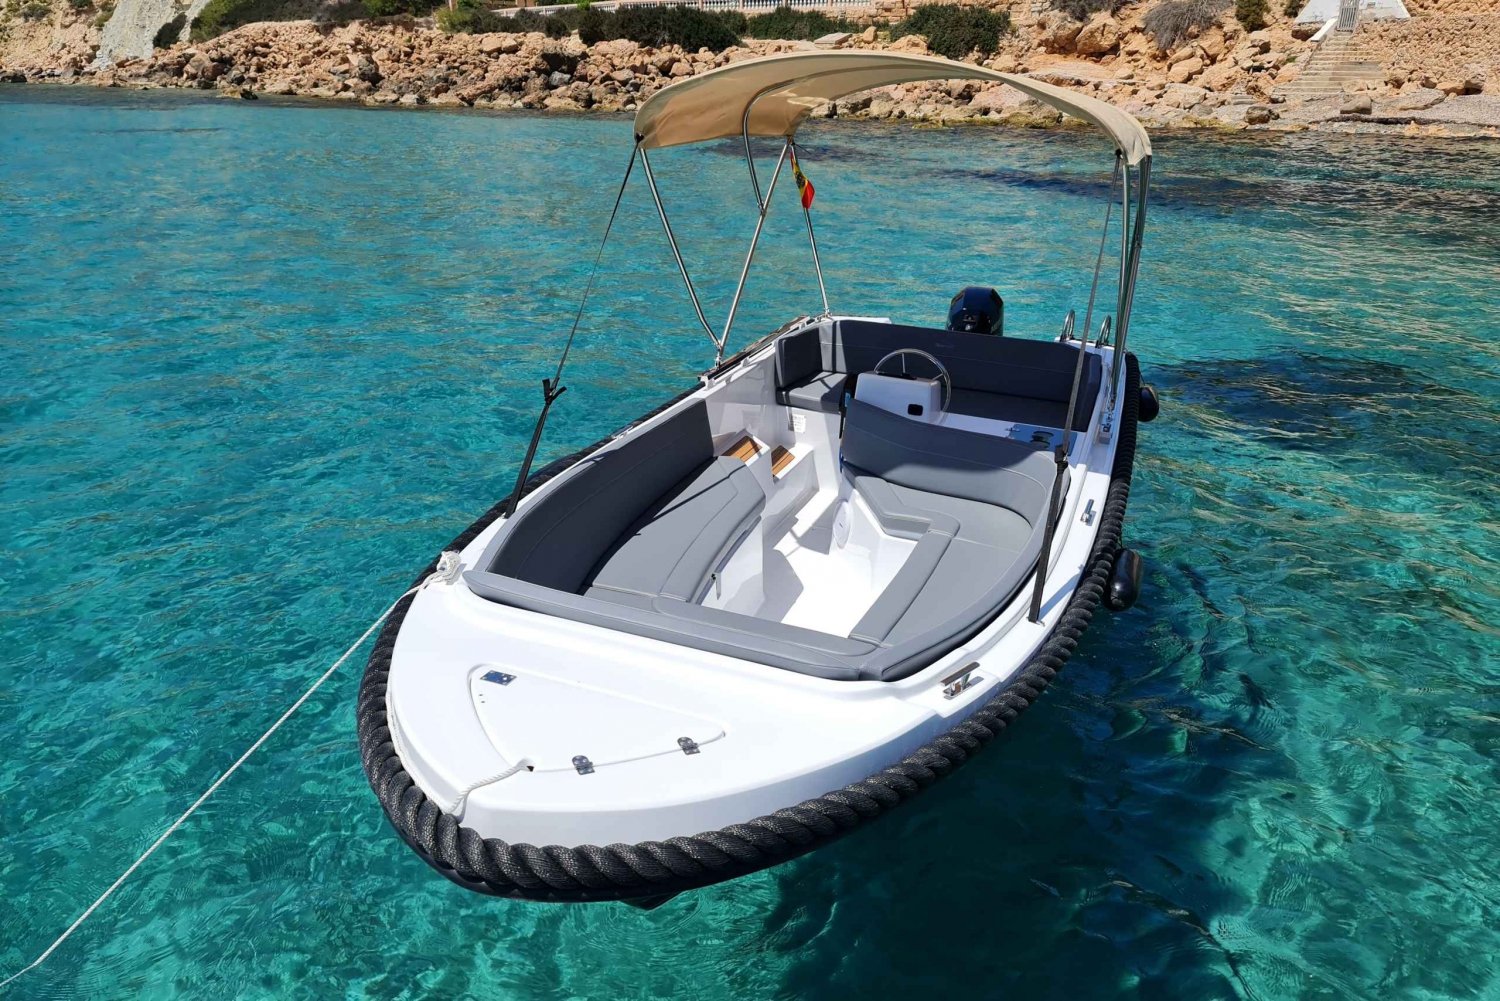 Boat rental WITHOUT License in Mallorca 'Santa Ponsa'